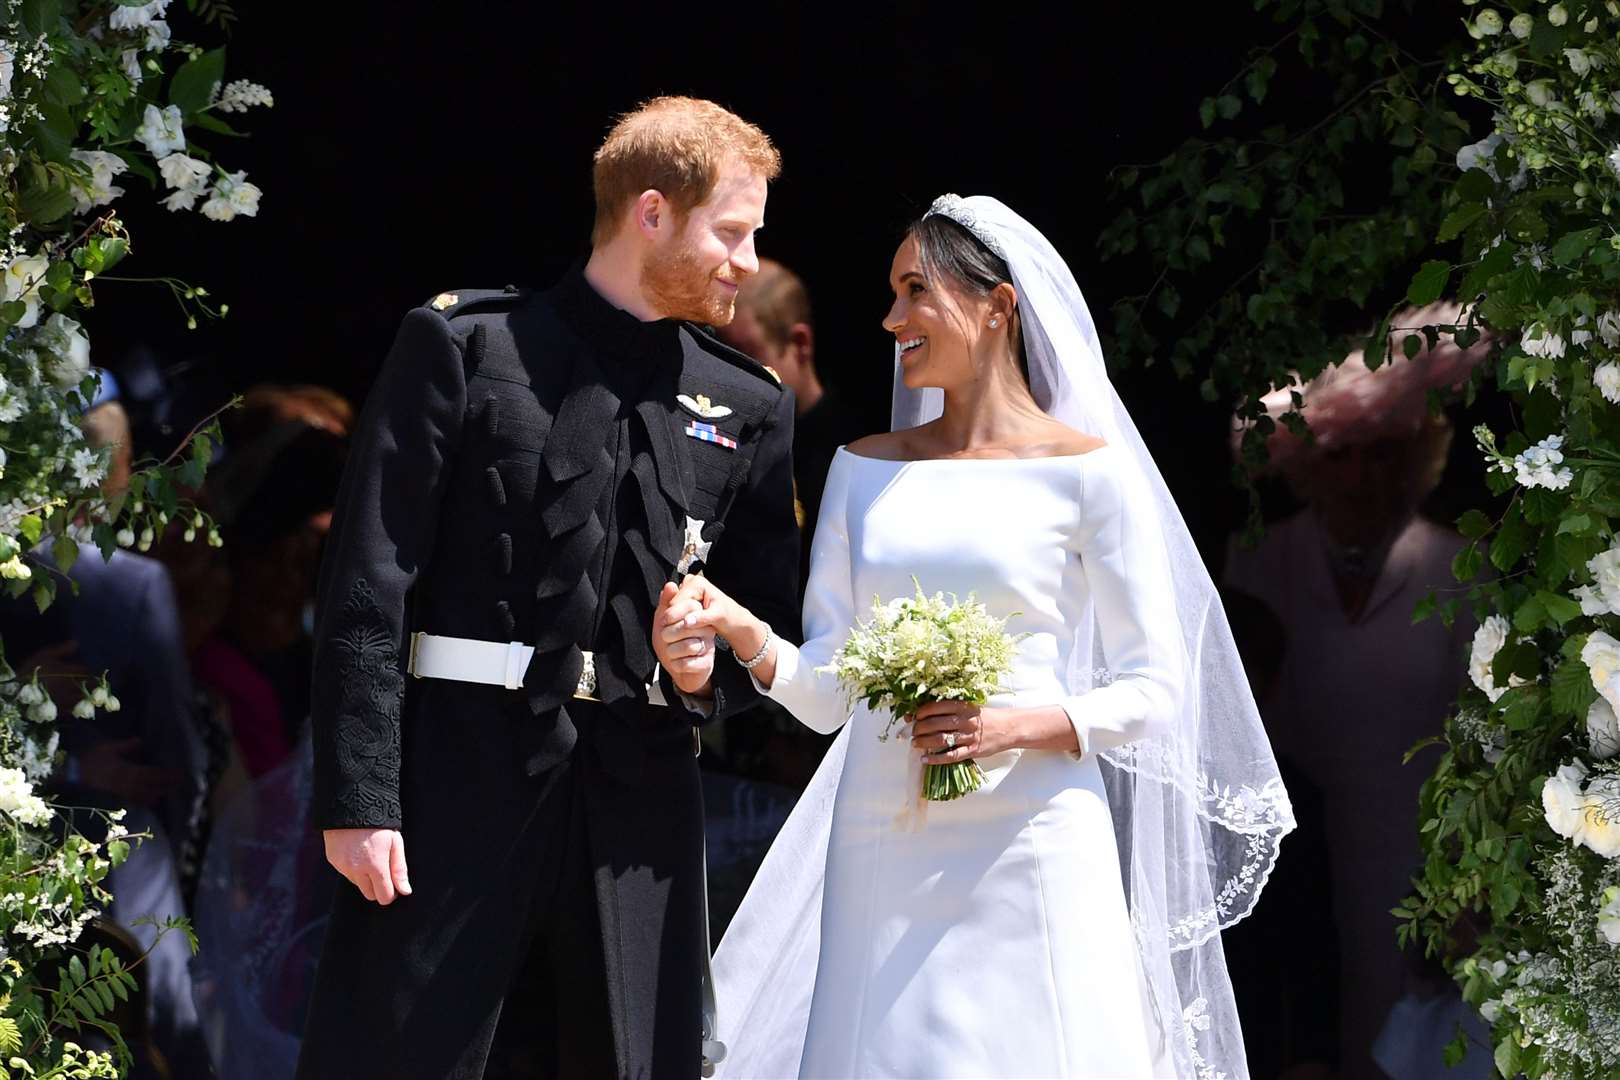 The Duchess of Sussex wrote to her father three months after her wedding (Ben Stansall/PA)